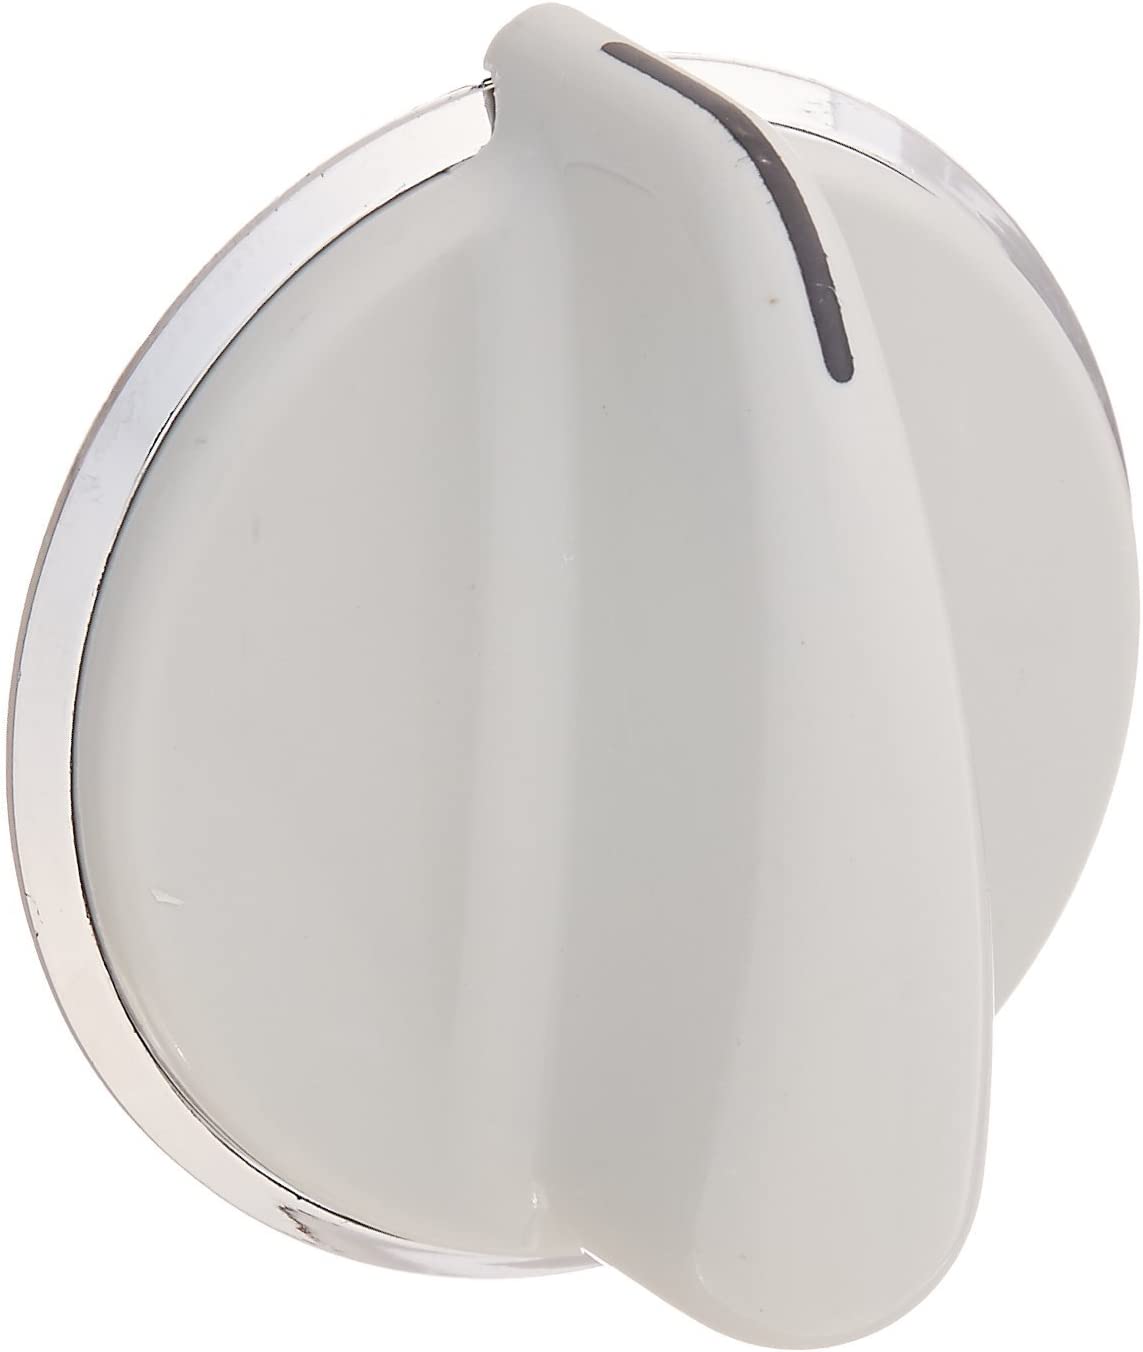 WE01X20380 Control Knob Compatible with General Electric Dryer (Light Grey)